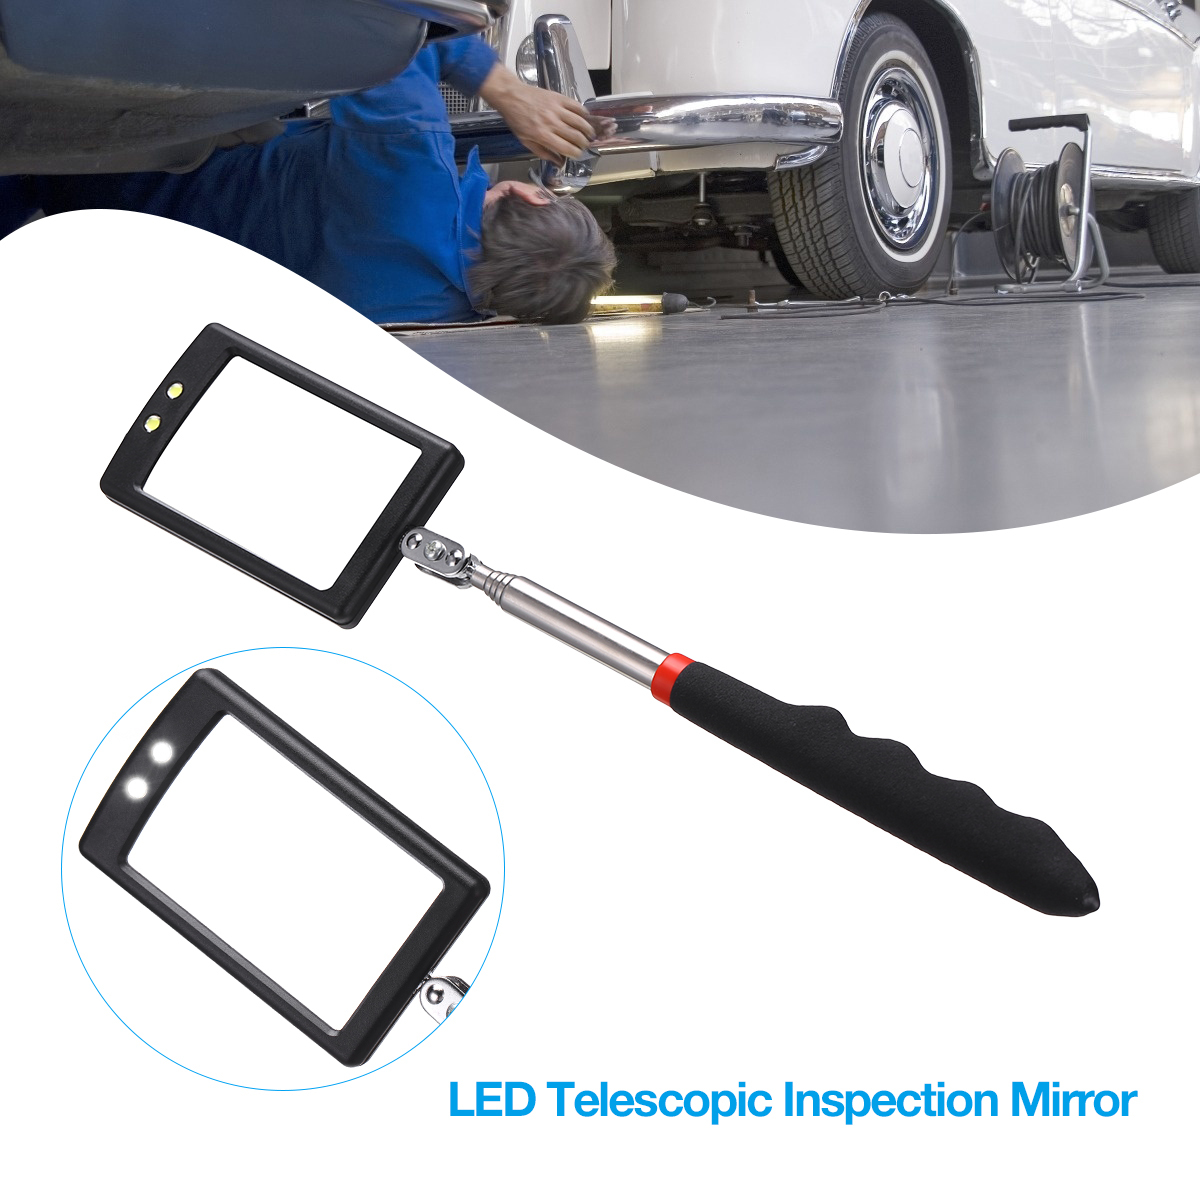 QWORK Telescoping Lighted Inspection Mirror Inspection Mirror LED Lighted Flexible Inspection Mirror 360 Swivel Adjust Tools for Extra Viewing 